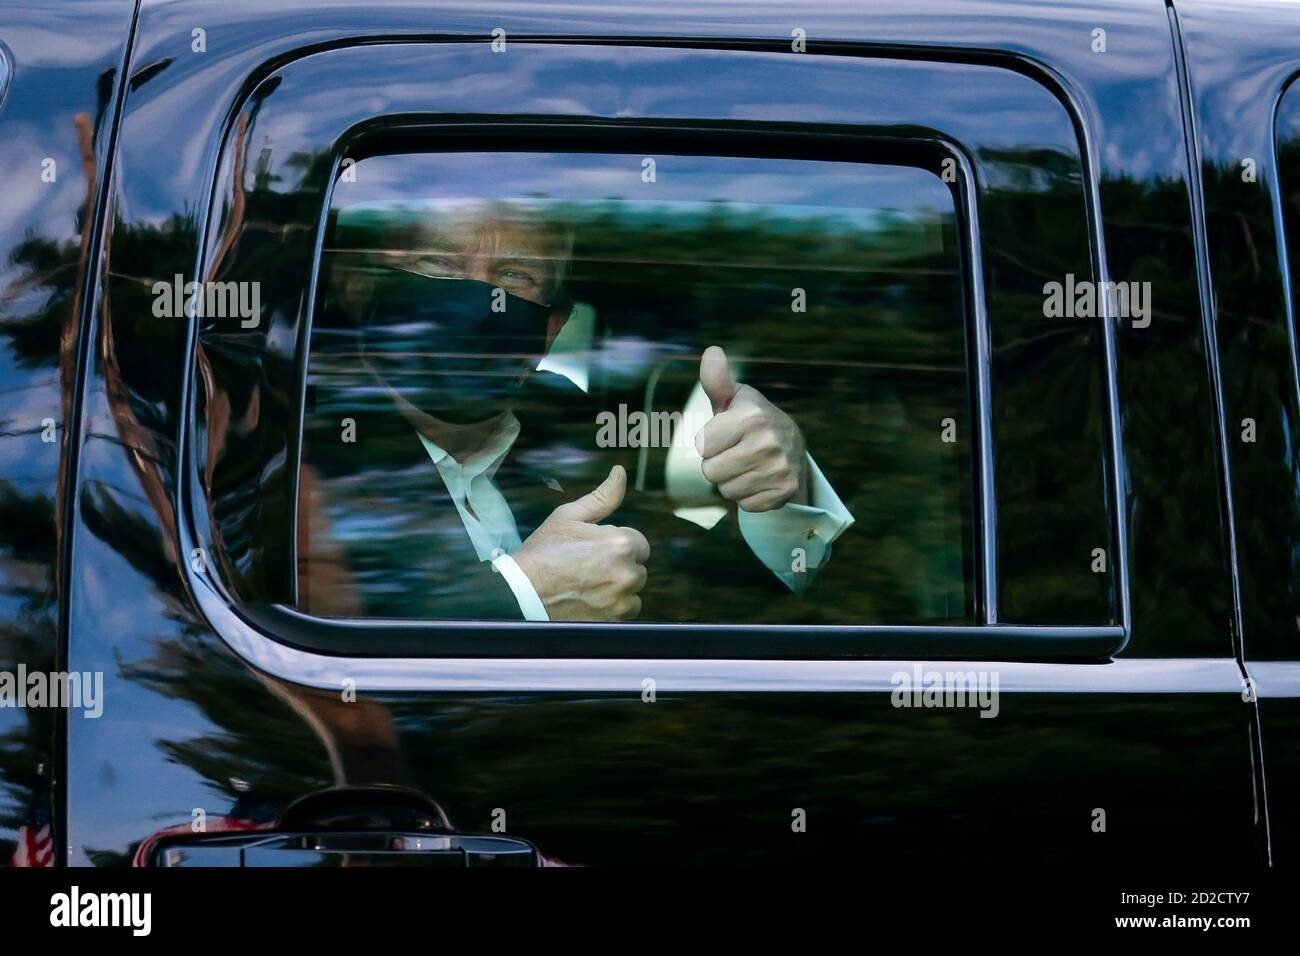 President Donald J. Trump, after being treated for COVID-19, greets supporters during a drive by outside of Walter Reed National Military Medical Center Sunday, October 4, 2020, in Bethesda, Maryland. (USA) Stock Photo